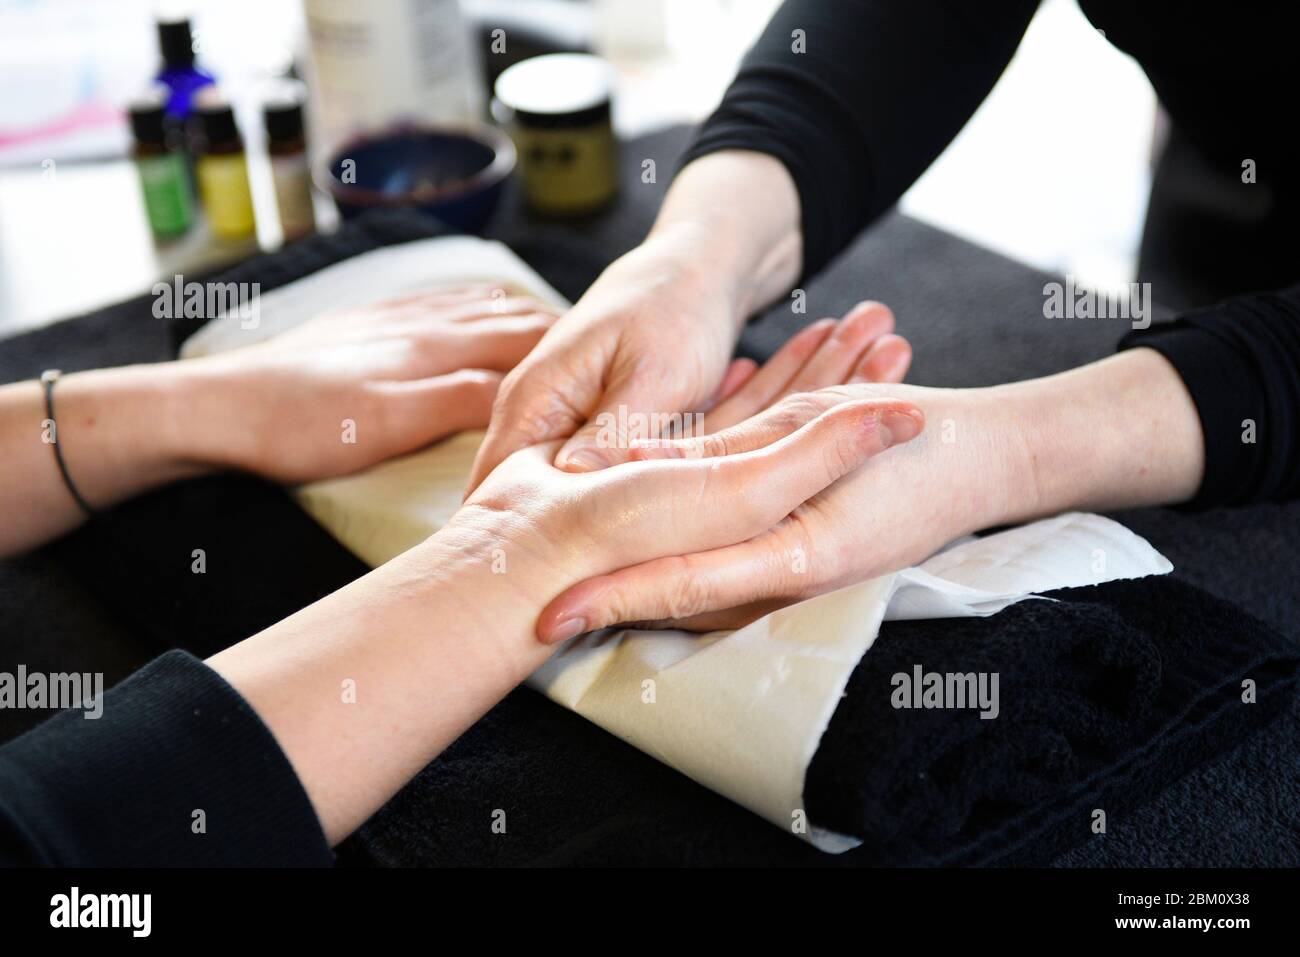 A Hand Massage Session Sometimes Known As Hand Reflexology Hand